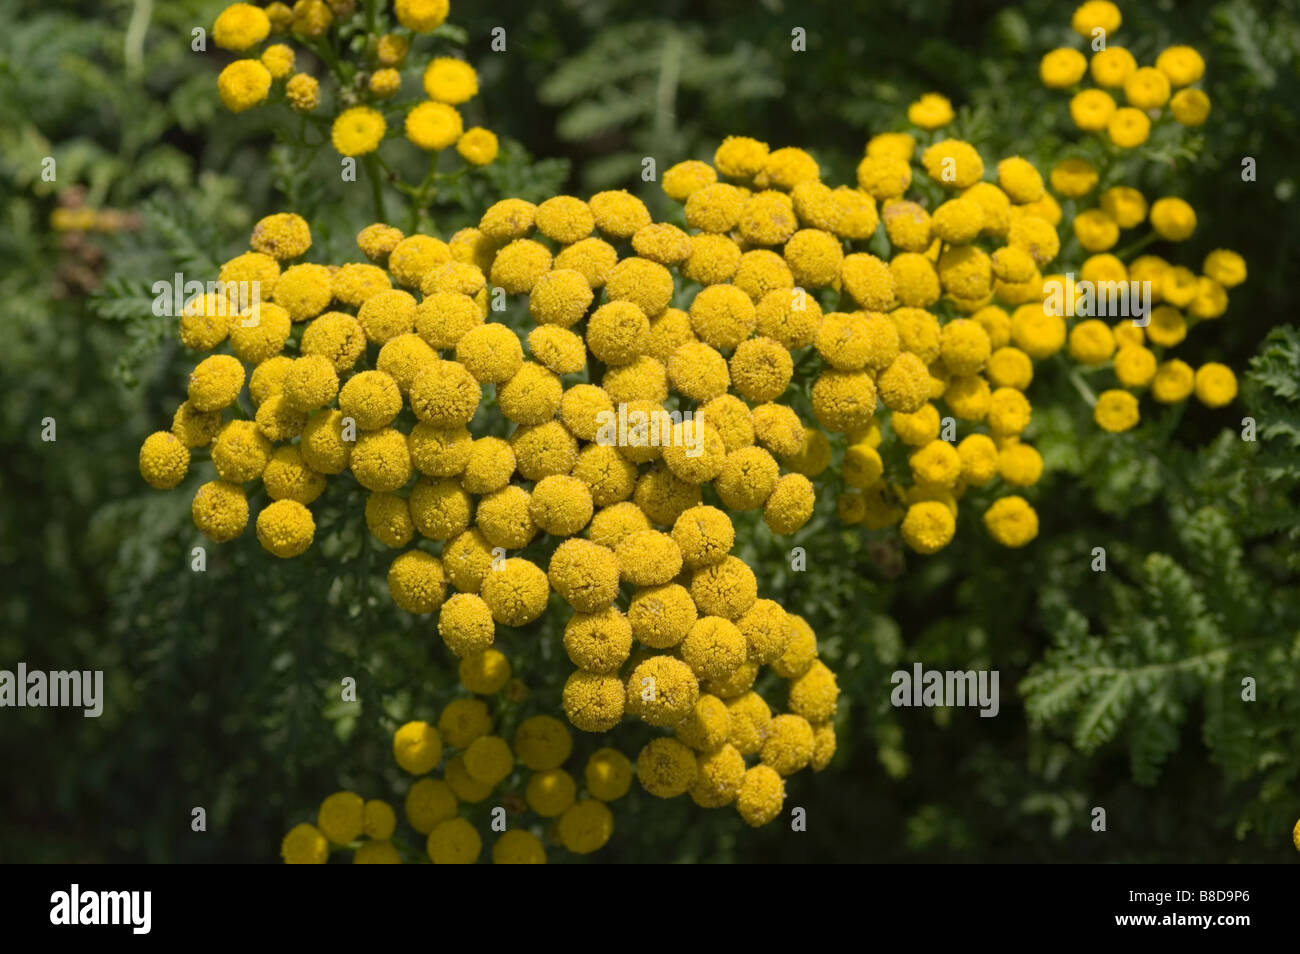 Yellow flowers of Ornamental Tansy, Curled Tansy, Fernleaf Golden Buttons Asteraceae, Compositae, Tanacetum vulgare var. Crispum Stock Photo